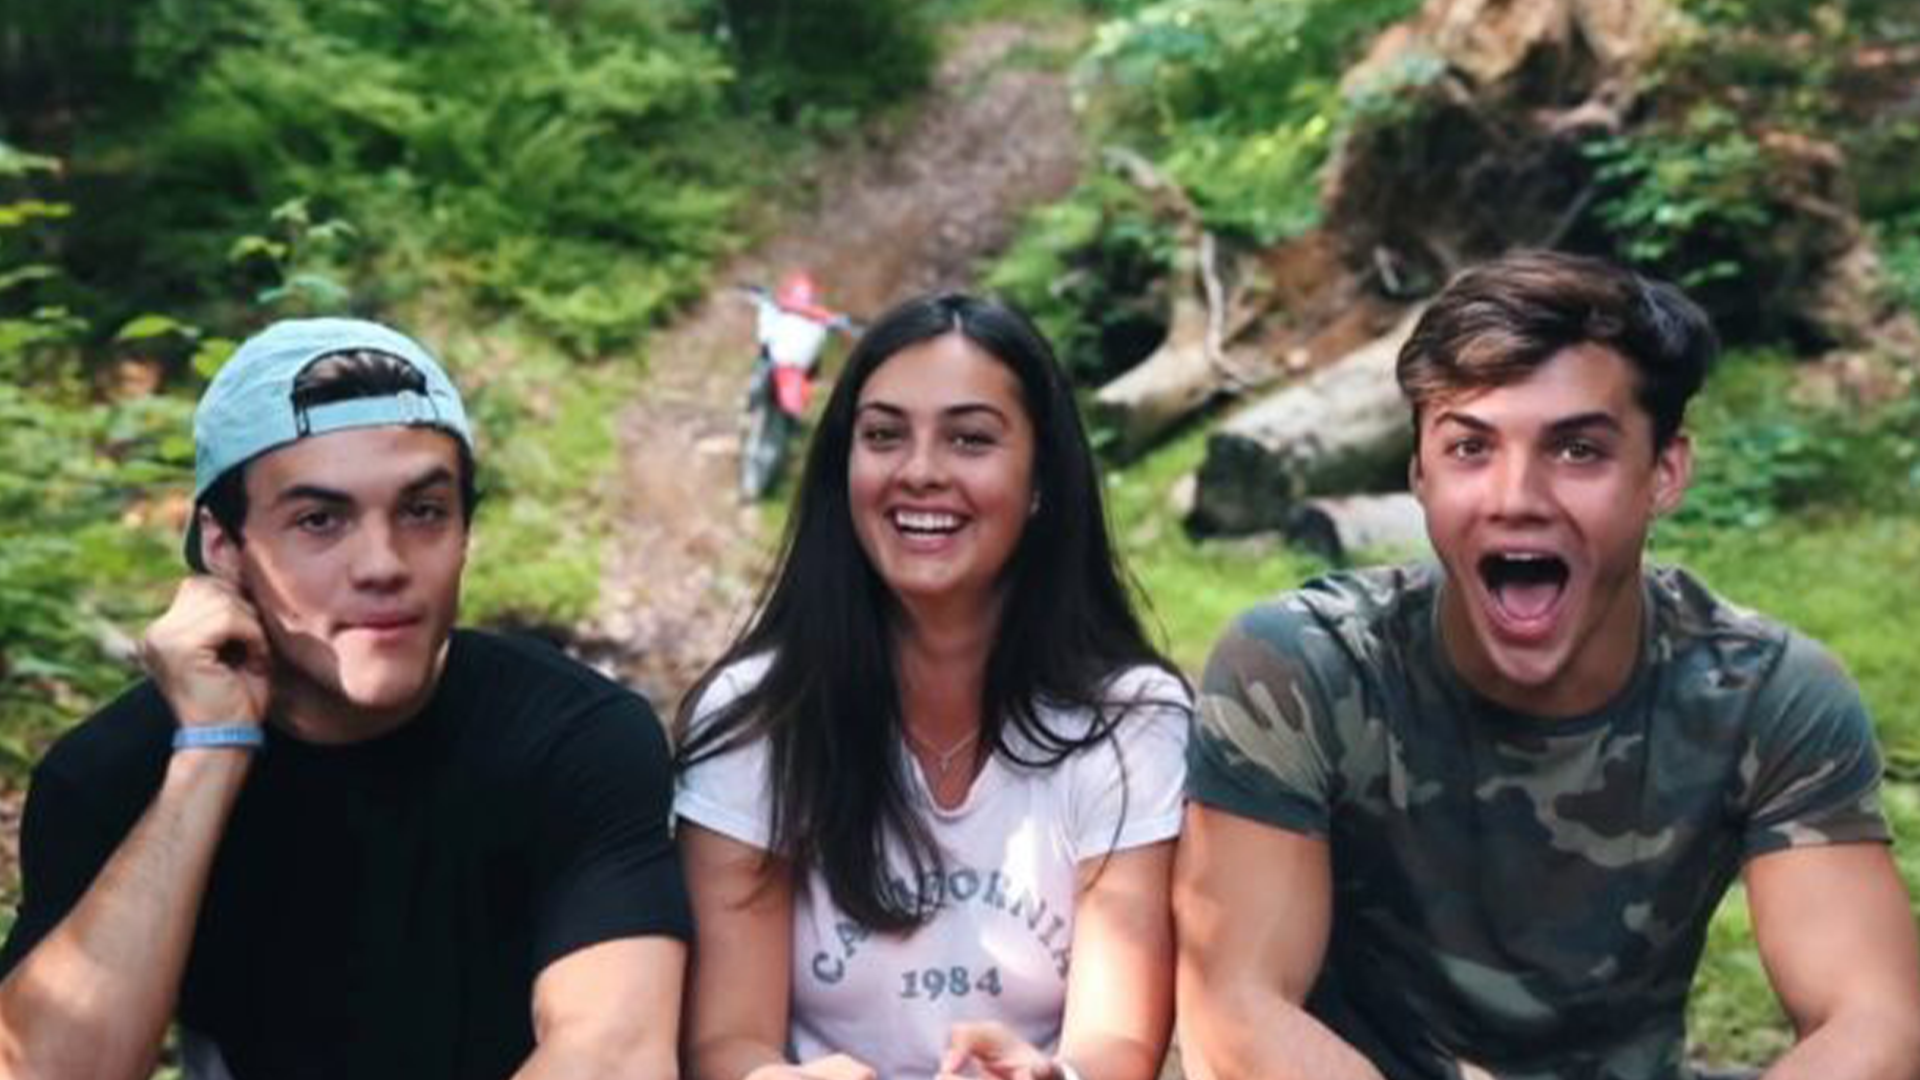 28 Fans Injured at The Dolan Twins' New Jersey Appearance, Ethan Dolan,  Grayson Dolan